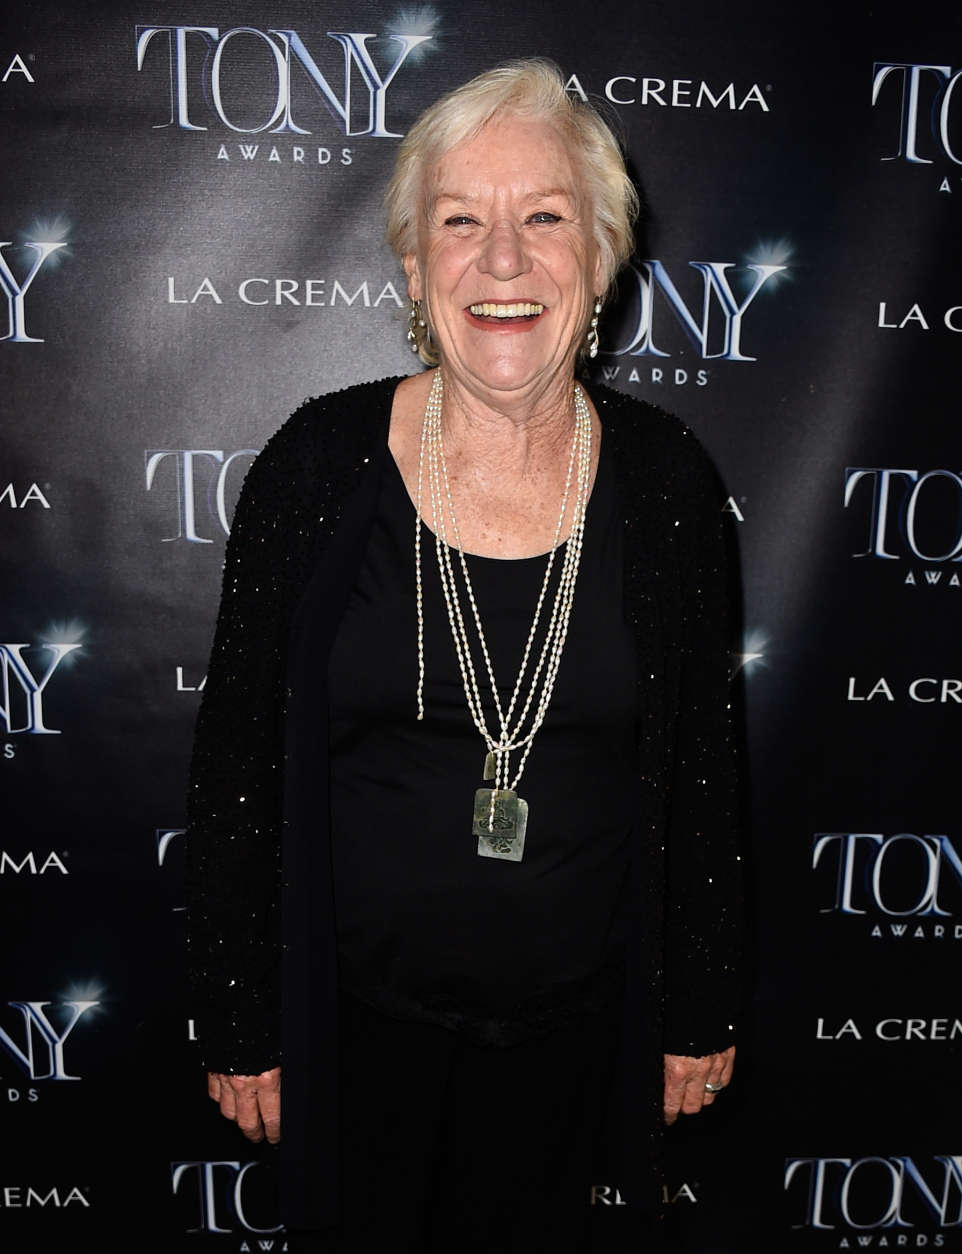 WEST HOLLYWOOD, CA - MARCH 25:  Actress Barbara Tarbuck attends The Tony Awards celebration of Broadway in Hollywood at Sunset Towers on March 25, 2015 in West Hollywood, California.  (Photo by Frazer Harrison/Getty Images for THE TONY AWARDS)